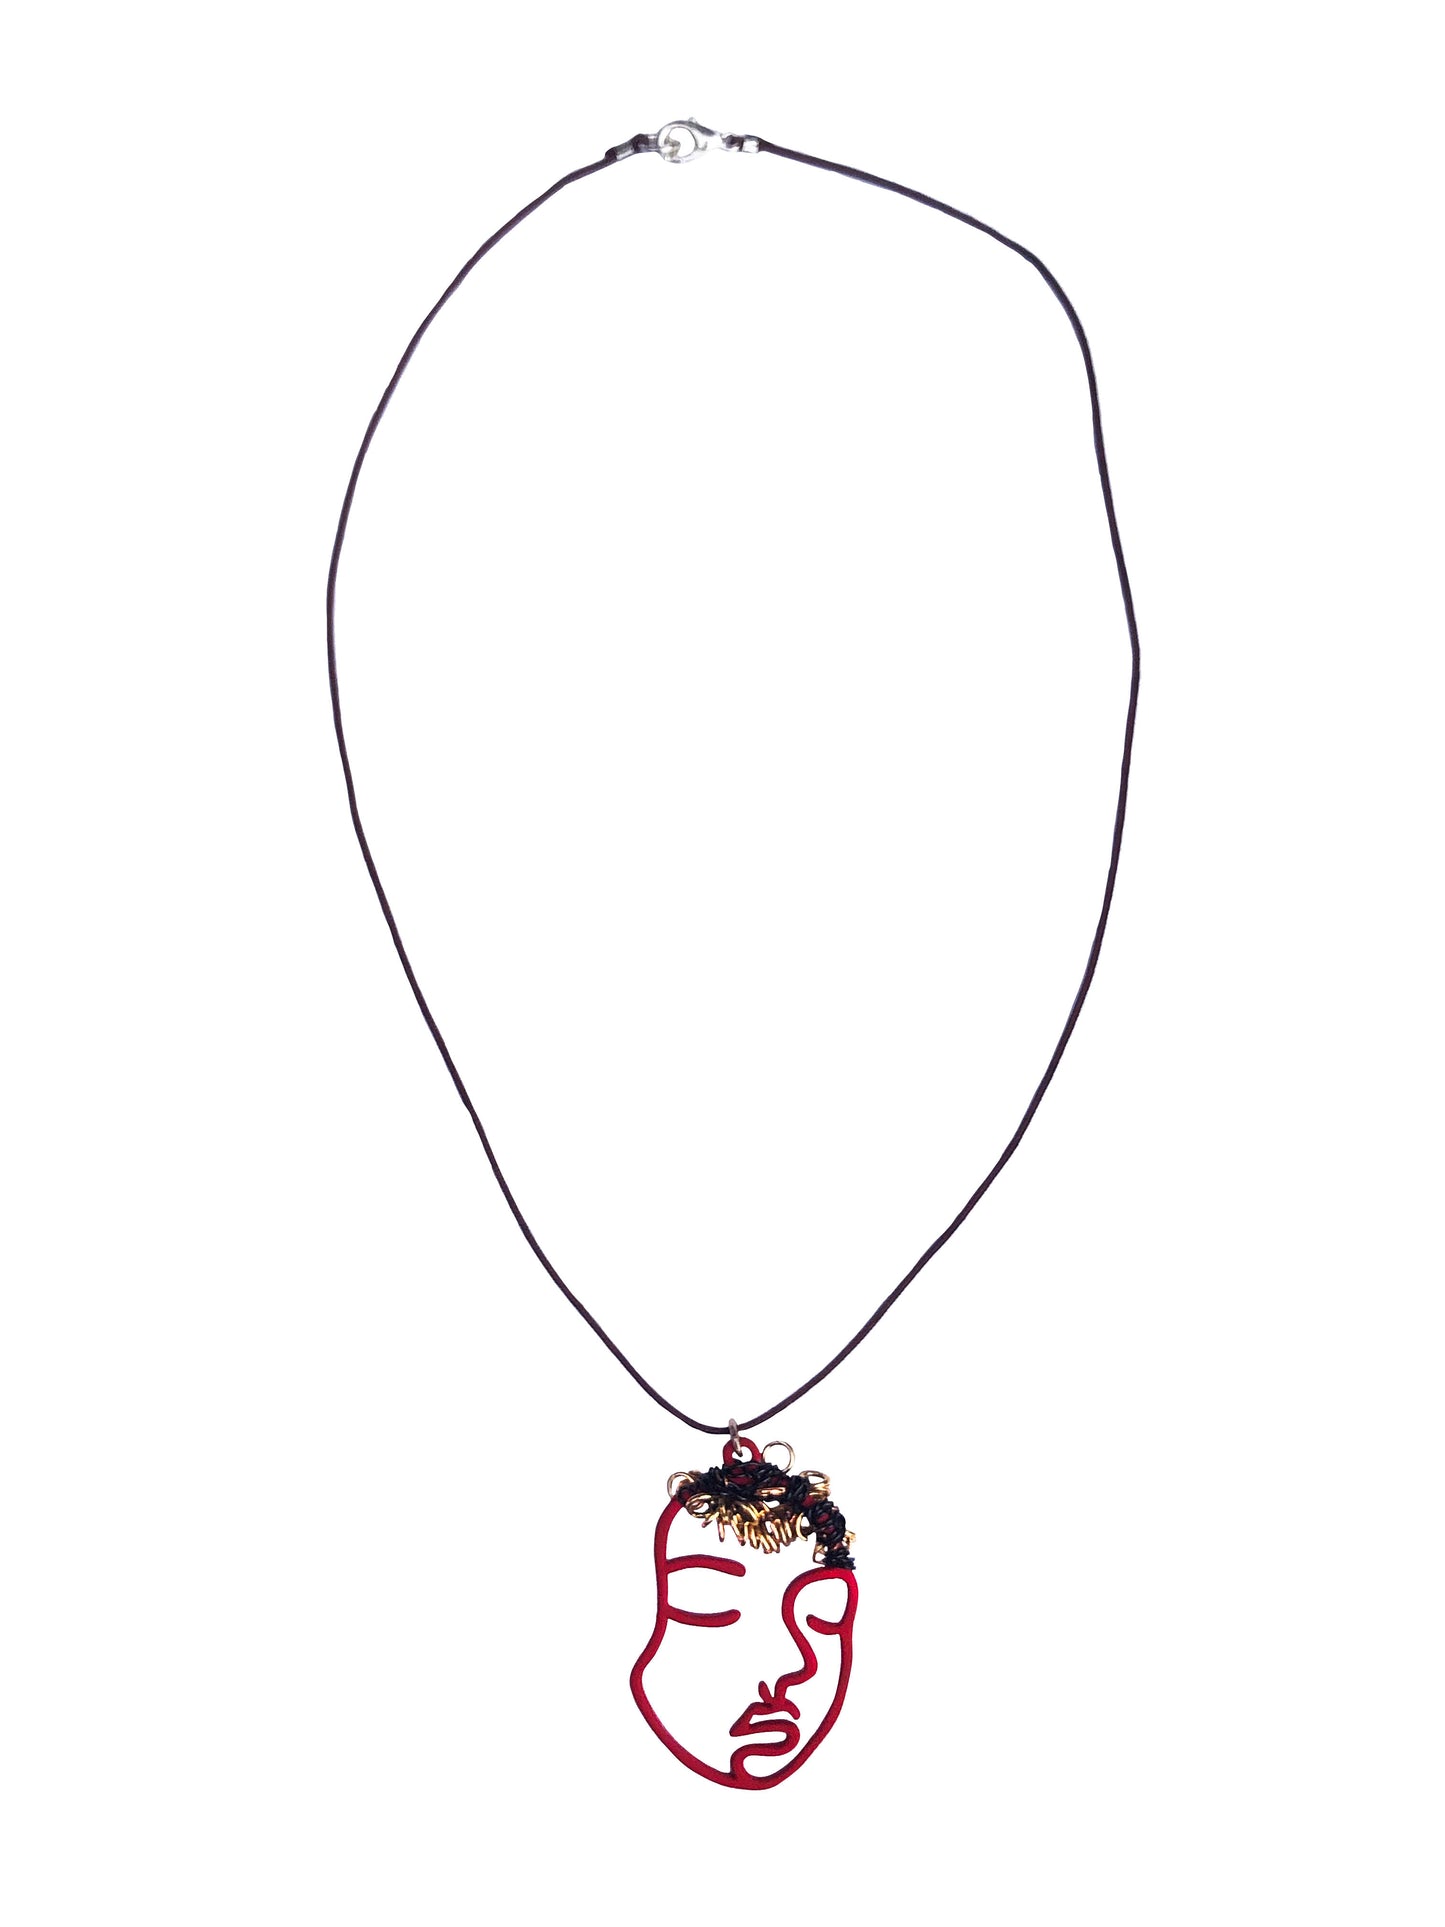 Pendant necklace made using a red hollowed-out face charm wire wrapped & beaded with small golden rings.